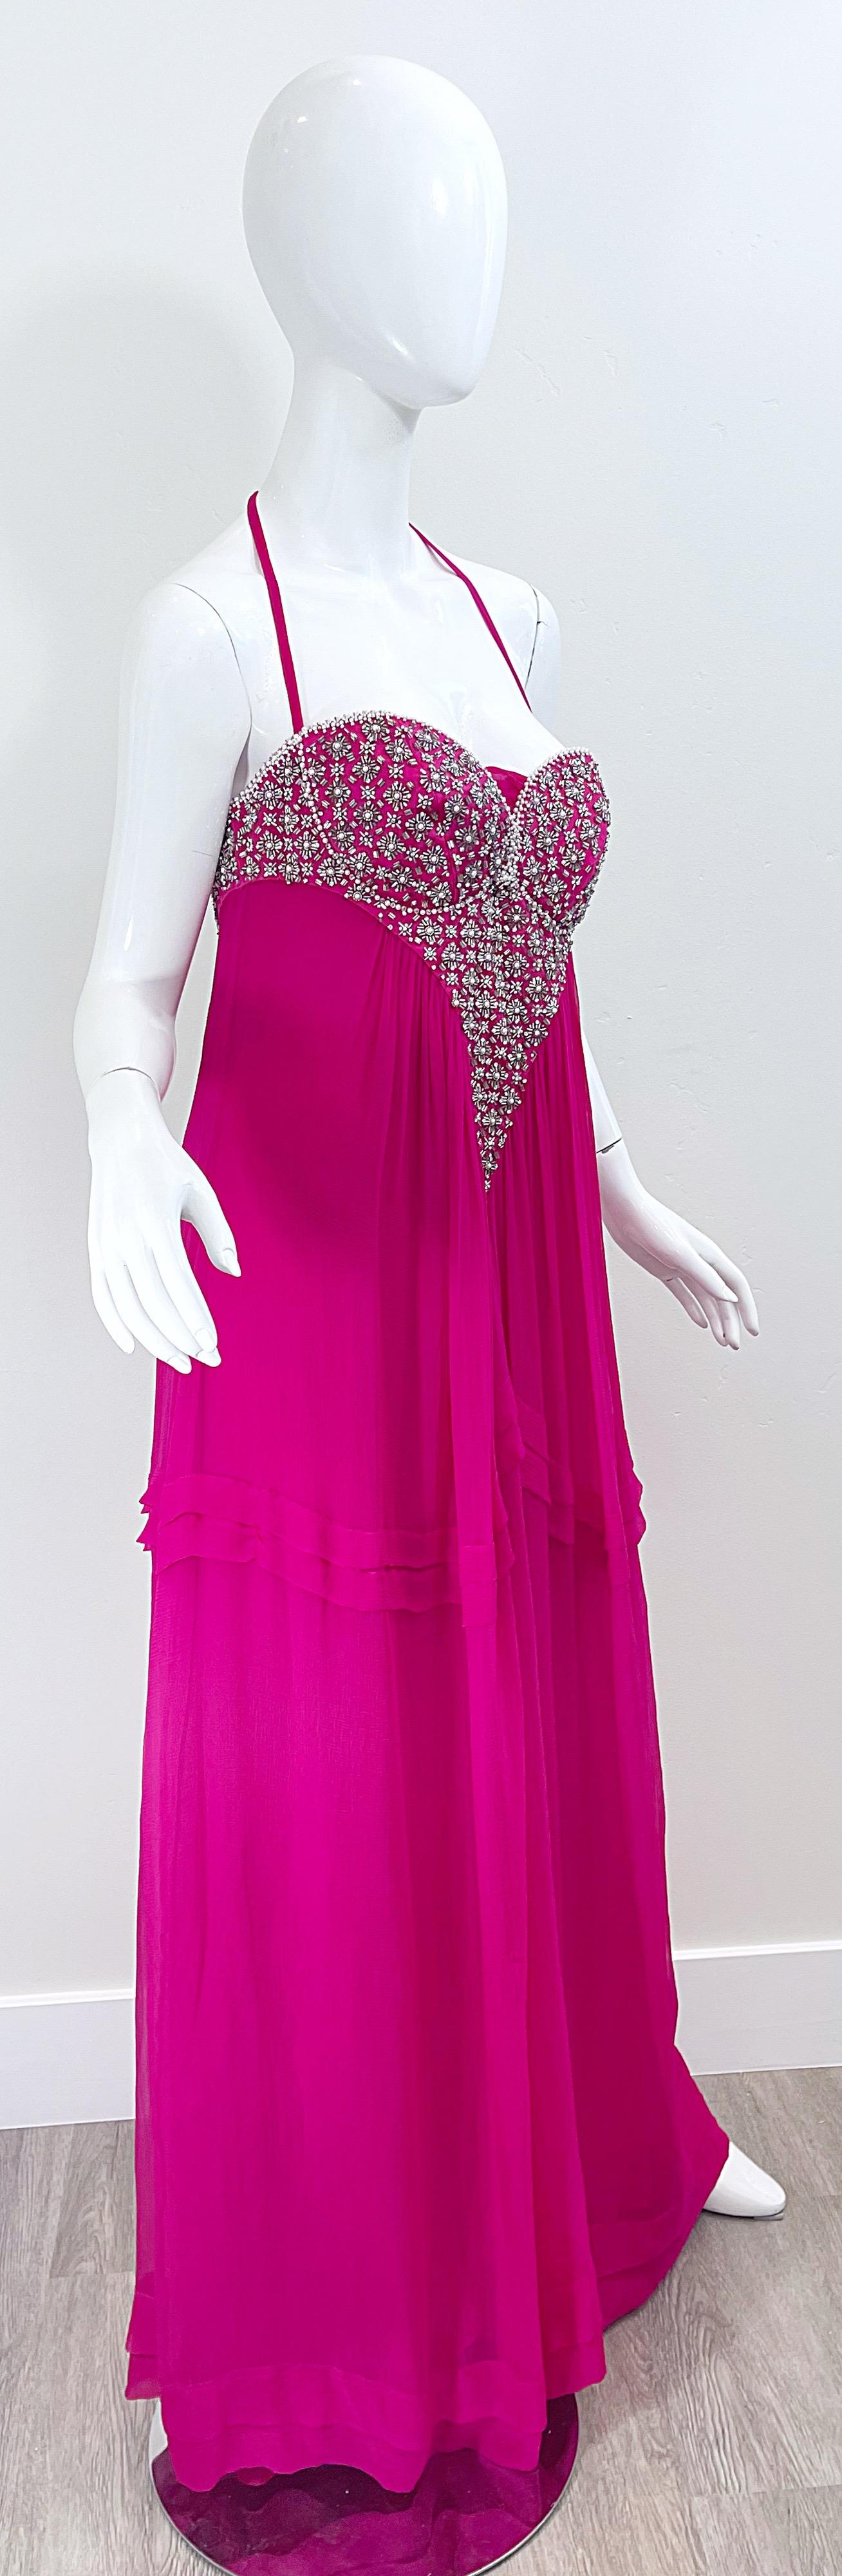 1990s Roberto Cavalli Size 44 / US 8 Hot Pink Chiffon Beaded Rhinestone 90s Gown For Sale 6